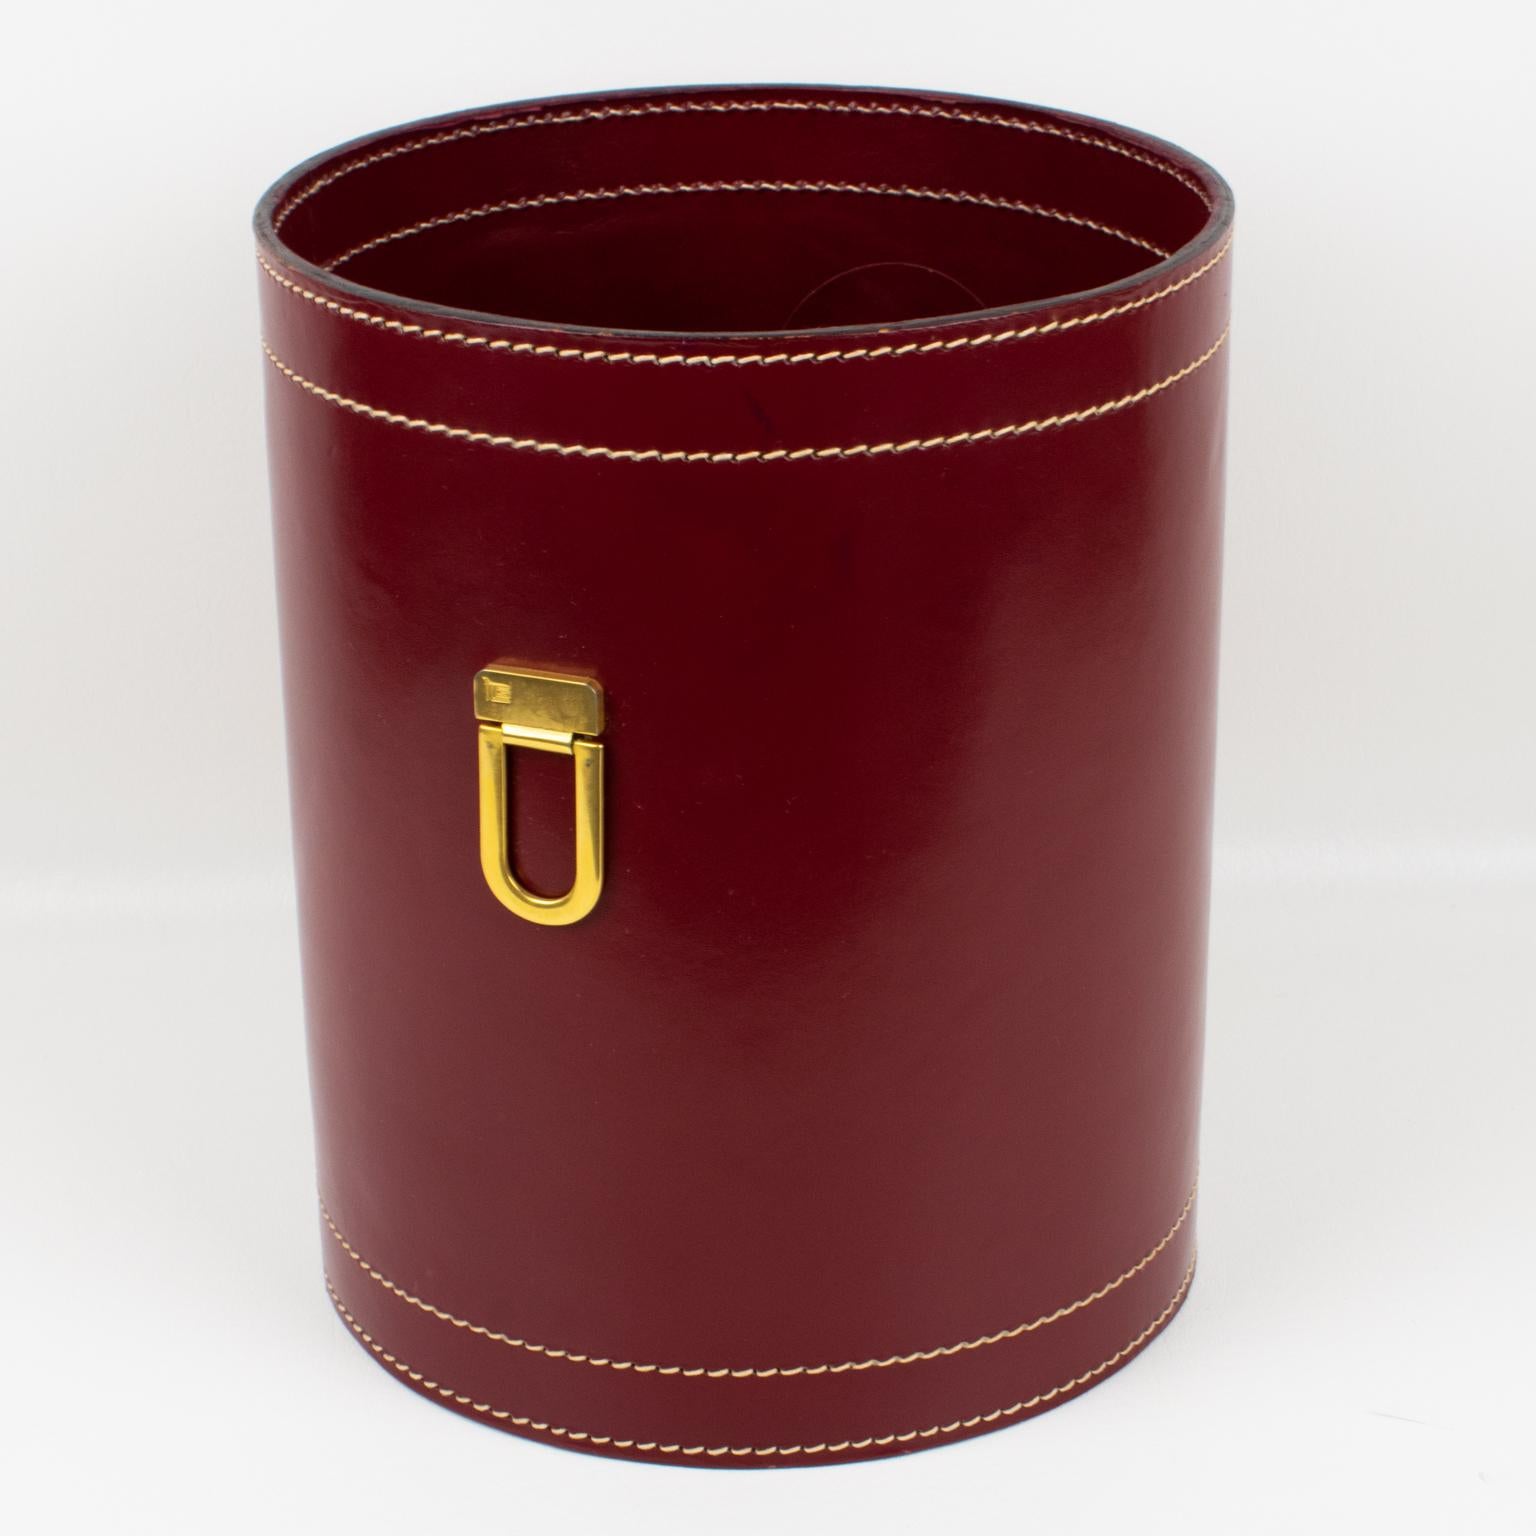 A functional 1940s modernist desk accessory, office waste-basket designed by ILG, Belgium. Streamline shape with burgundy red hand-stitched leather and gilded brass handles on the side. All leather inside and out. A very nice addition to your next